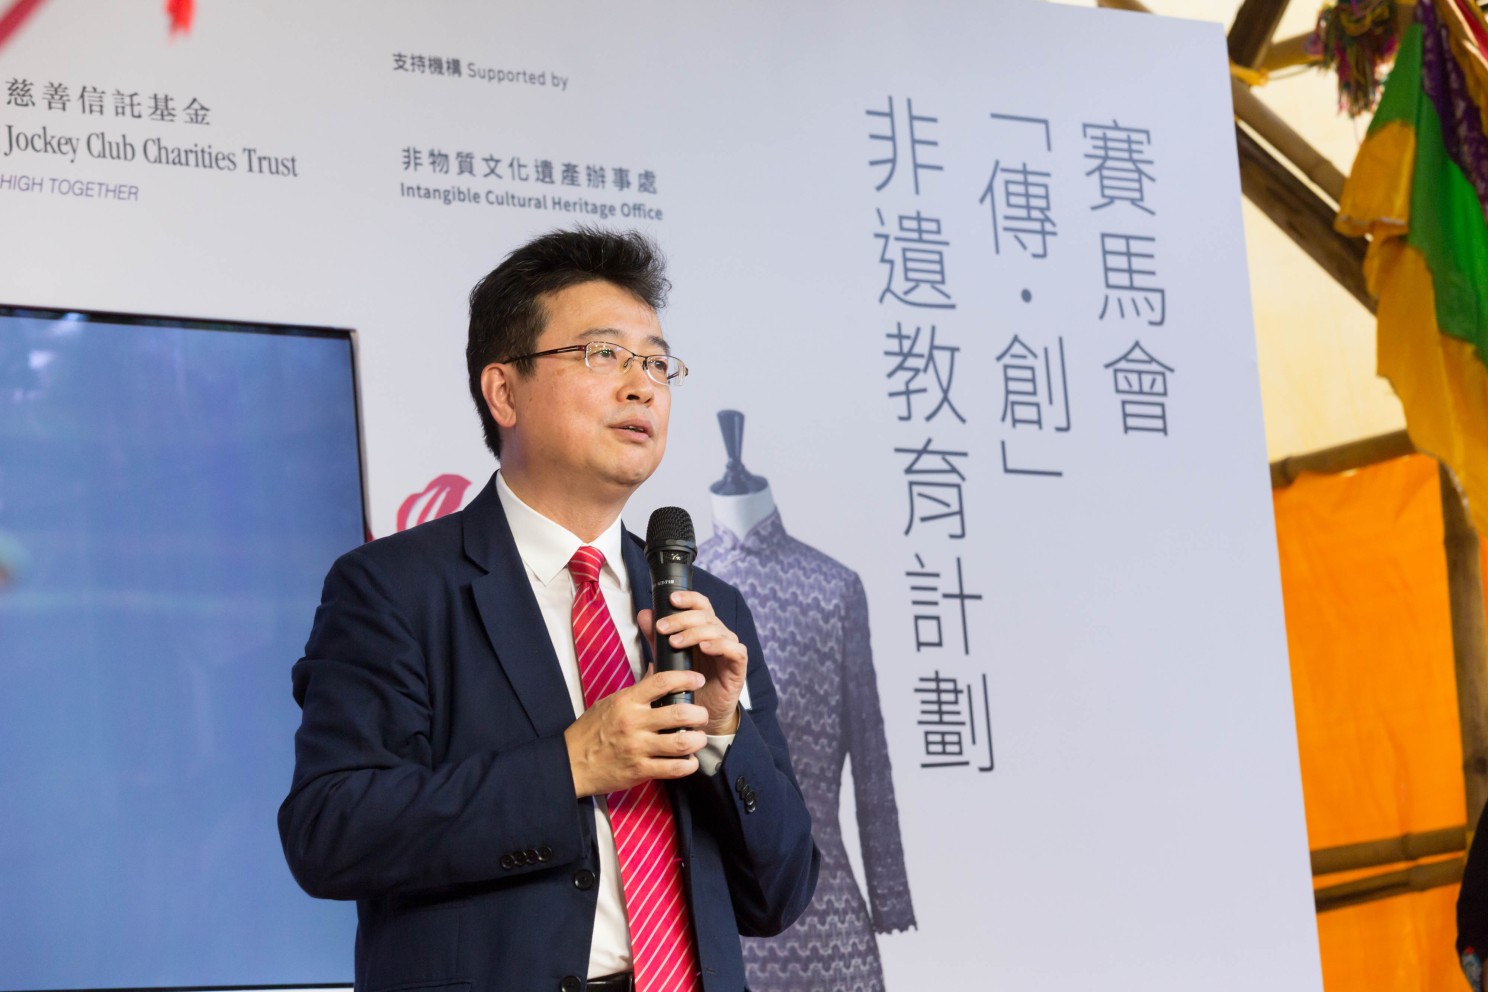 Prof Lau Chi-pang makes every effort in preserving intangible cultural heritage of Hong Kong with his knowledge transfer project to revitalise traditional craftsmanship.